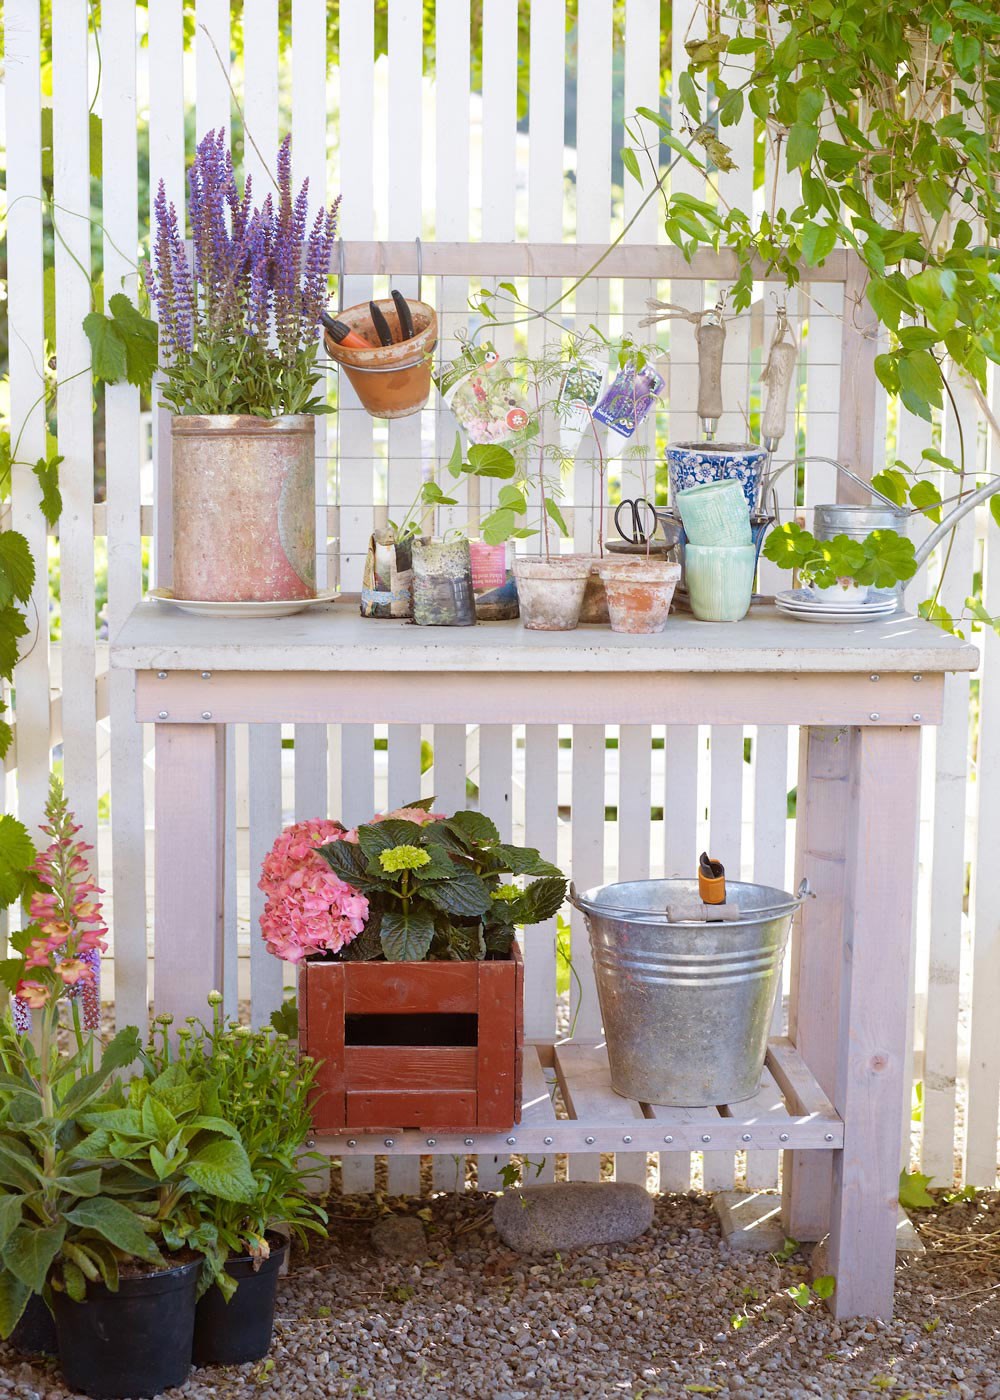 3 ways to make a handy potting station for your yard | Better Homes and ...